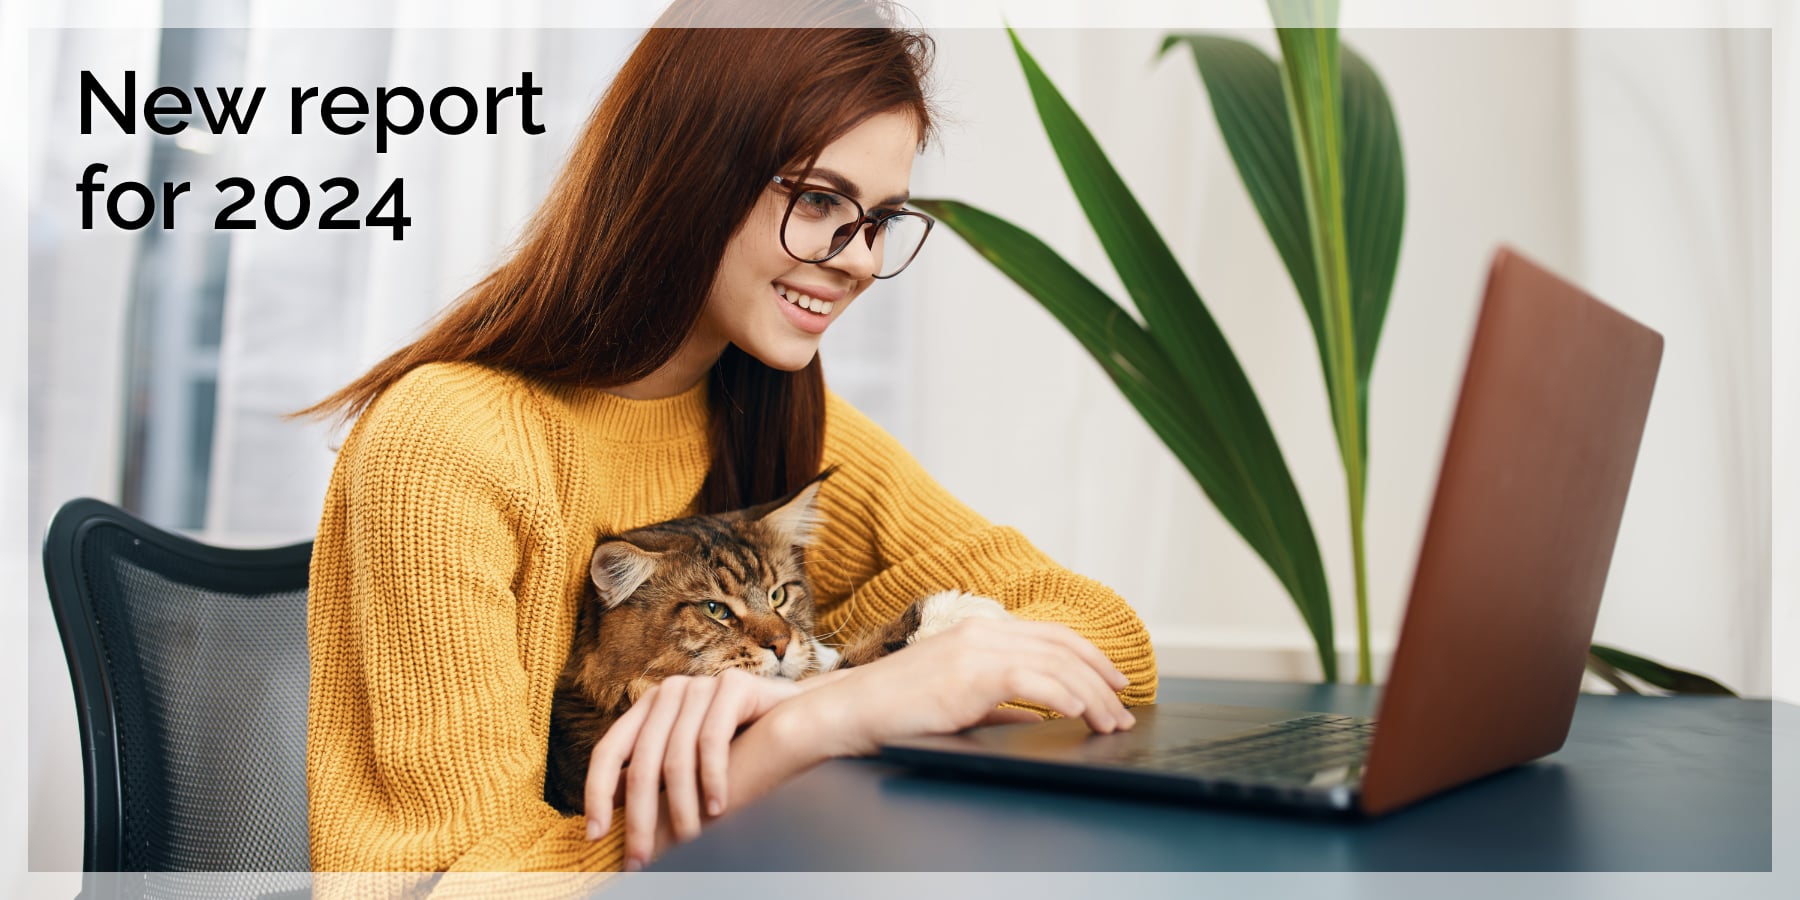 A young woman in a warm yellow sweater works on a laptop while holding her cat.